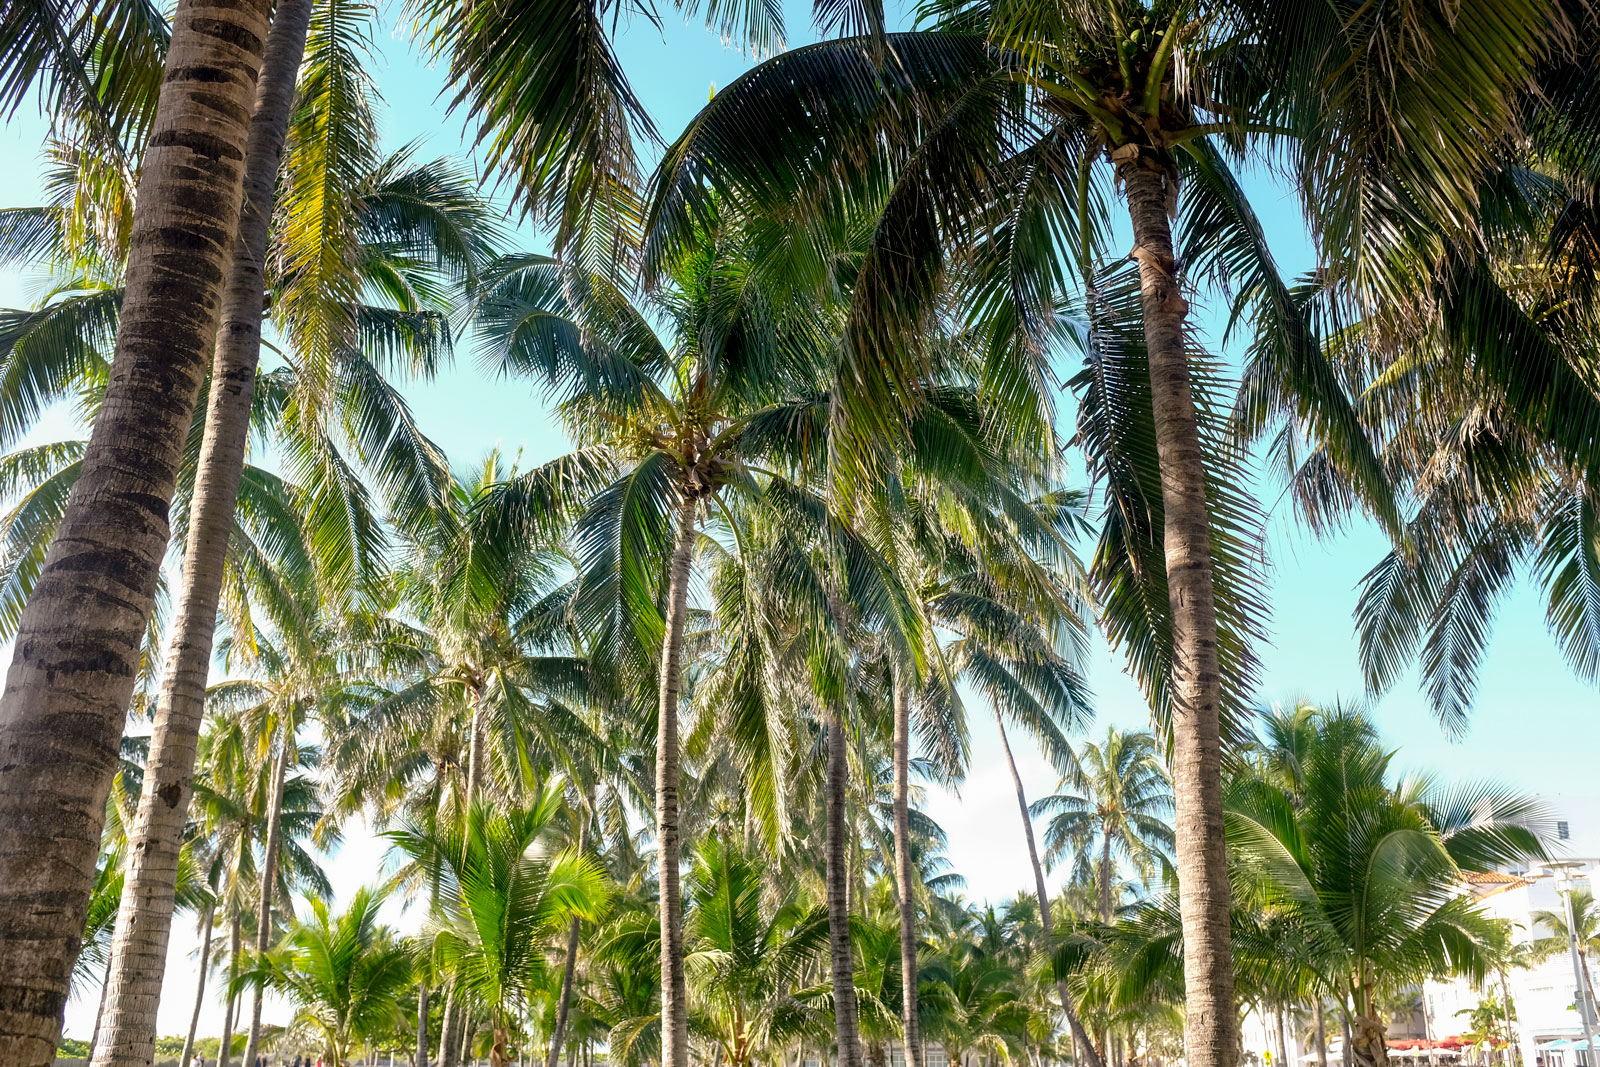 A forest of palm trees in Miami Beach